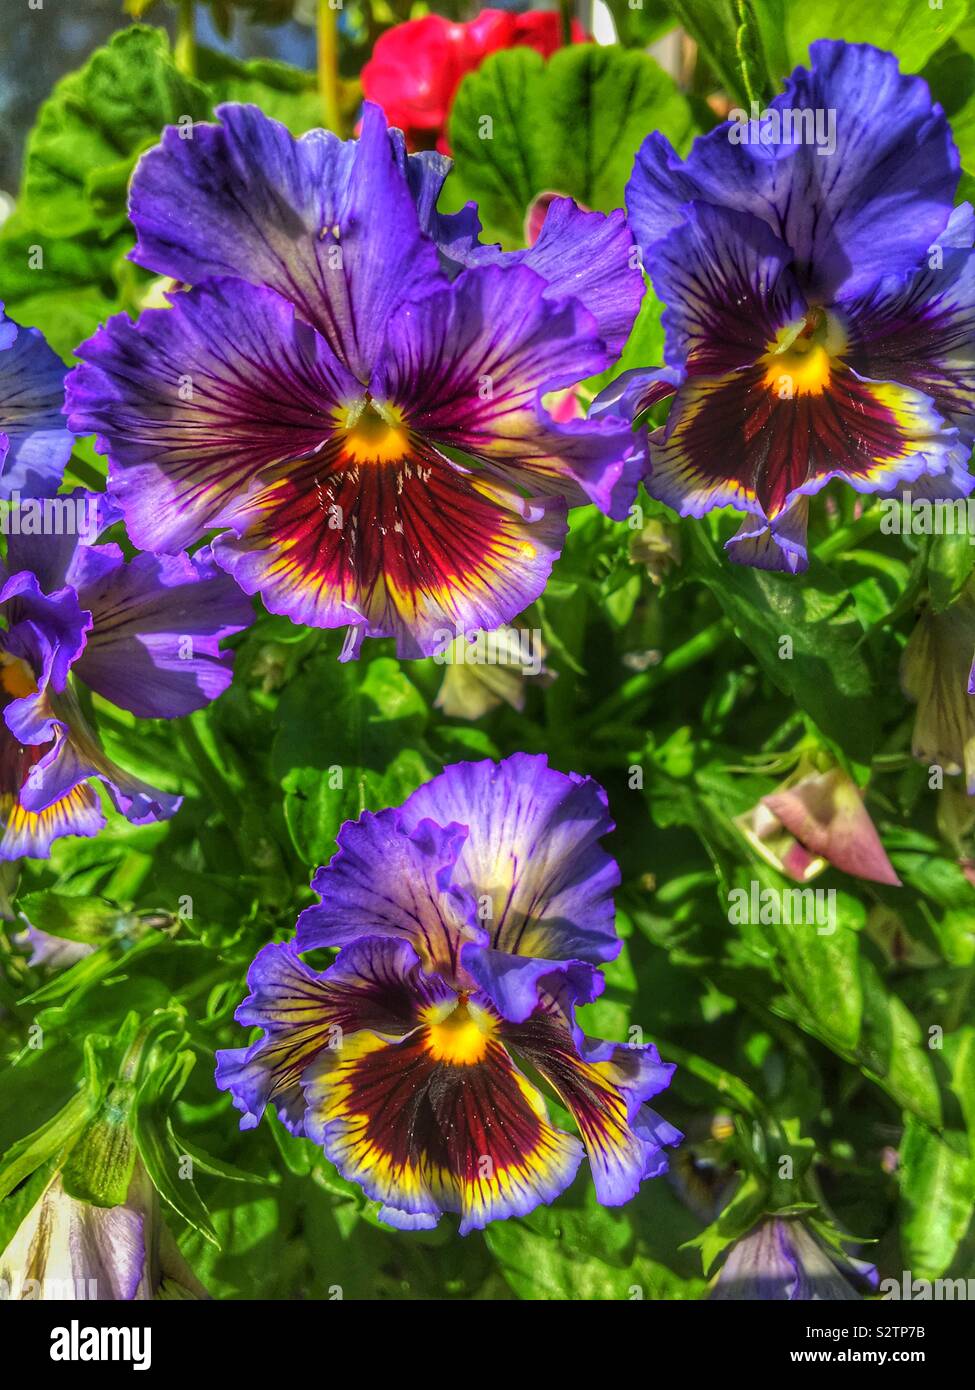 Frilly pansies close up Stock Photo